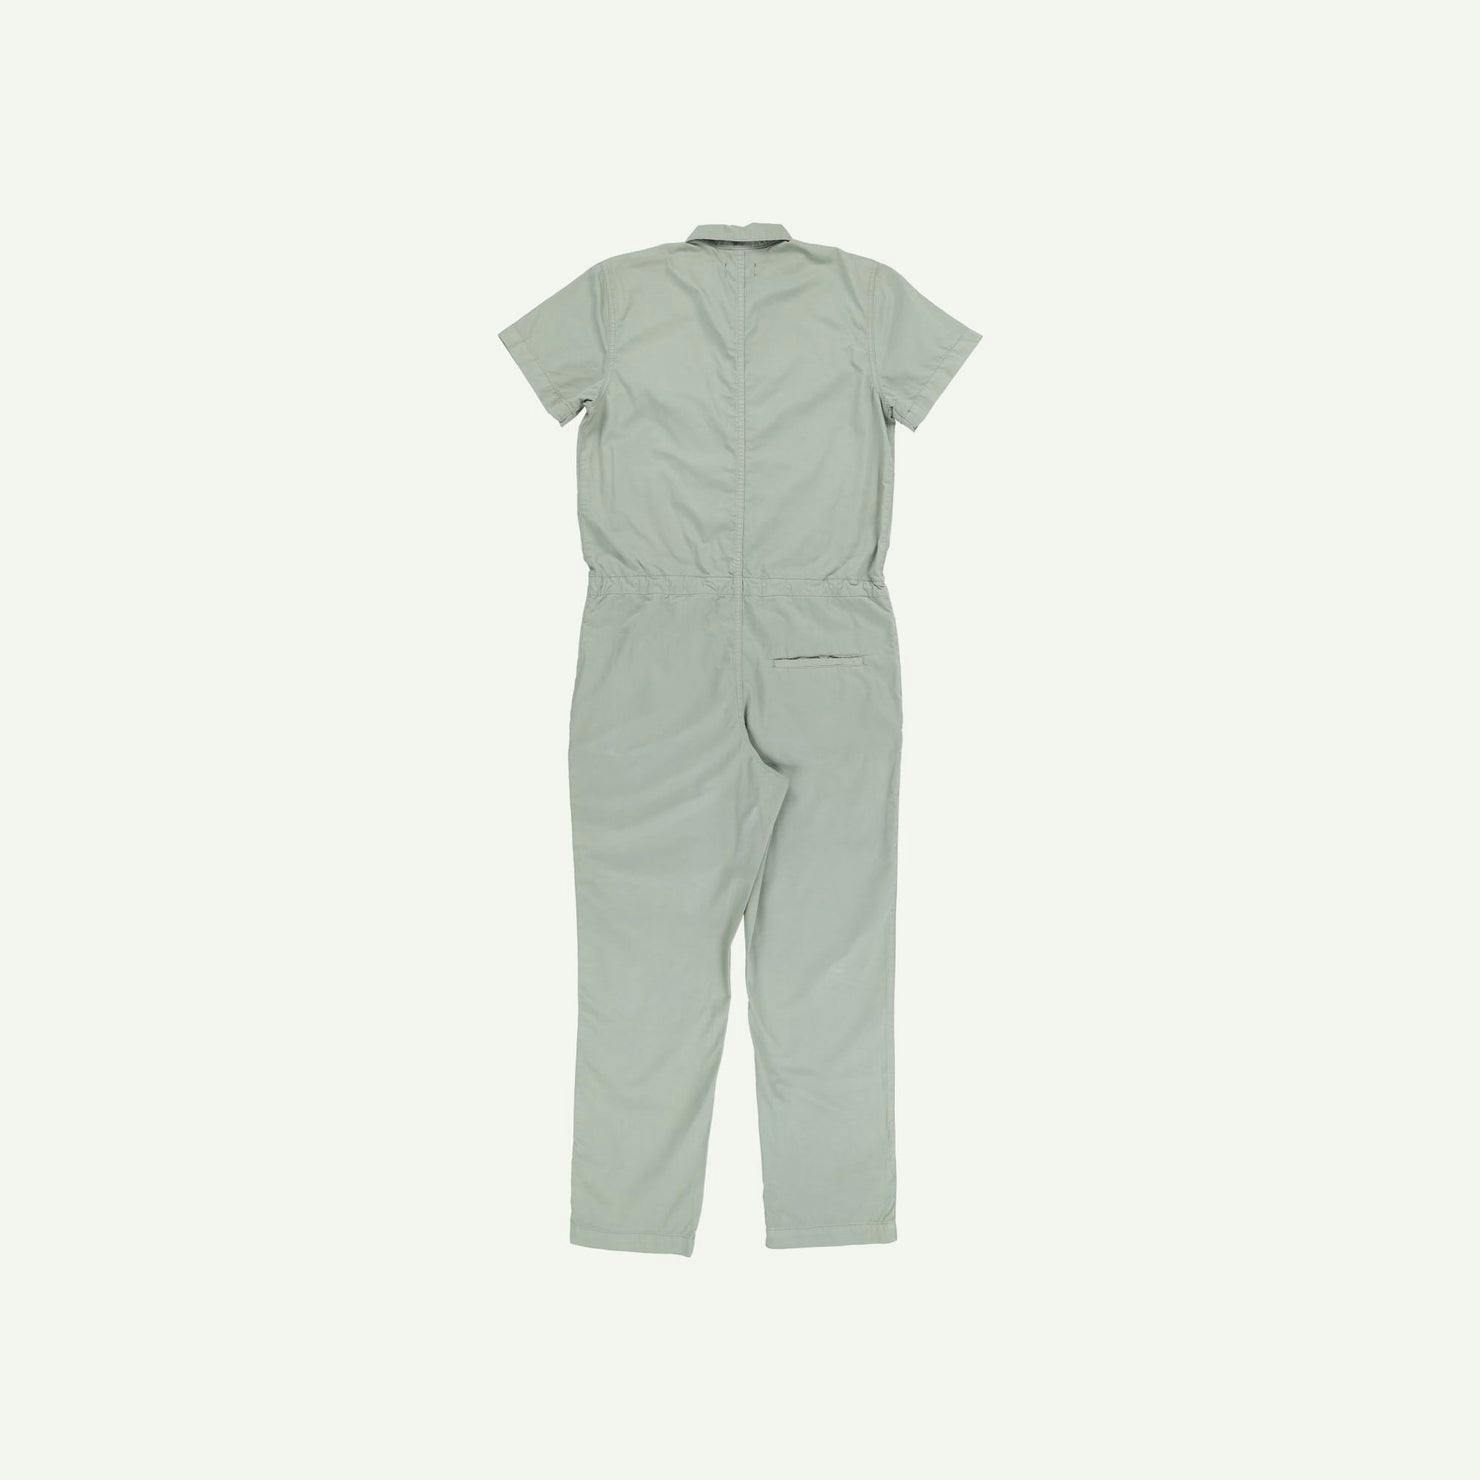 Finisterre As new Green Jumpsuit